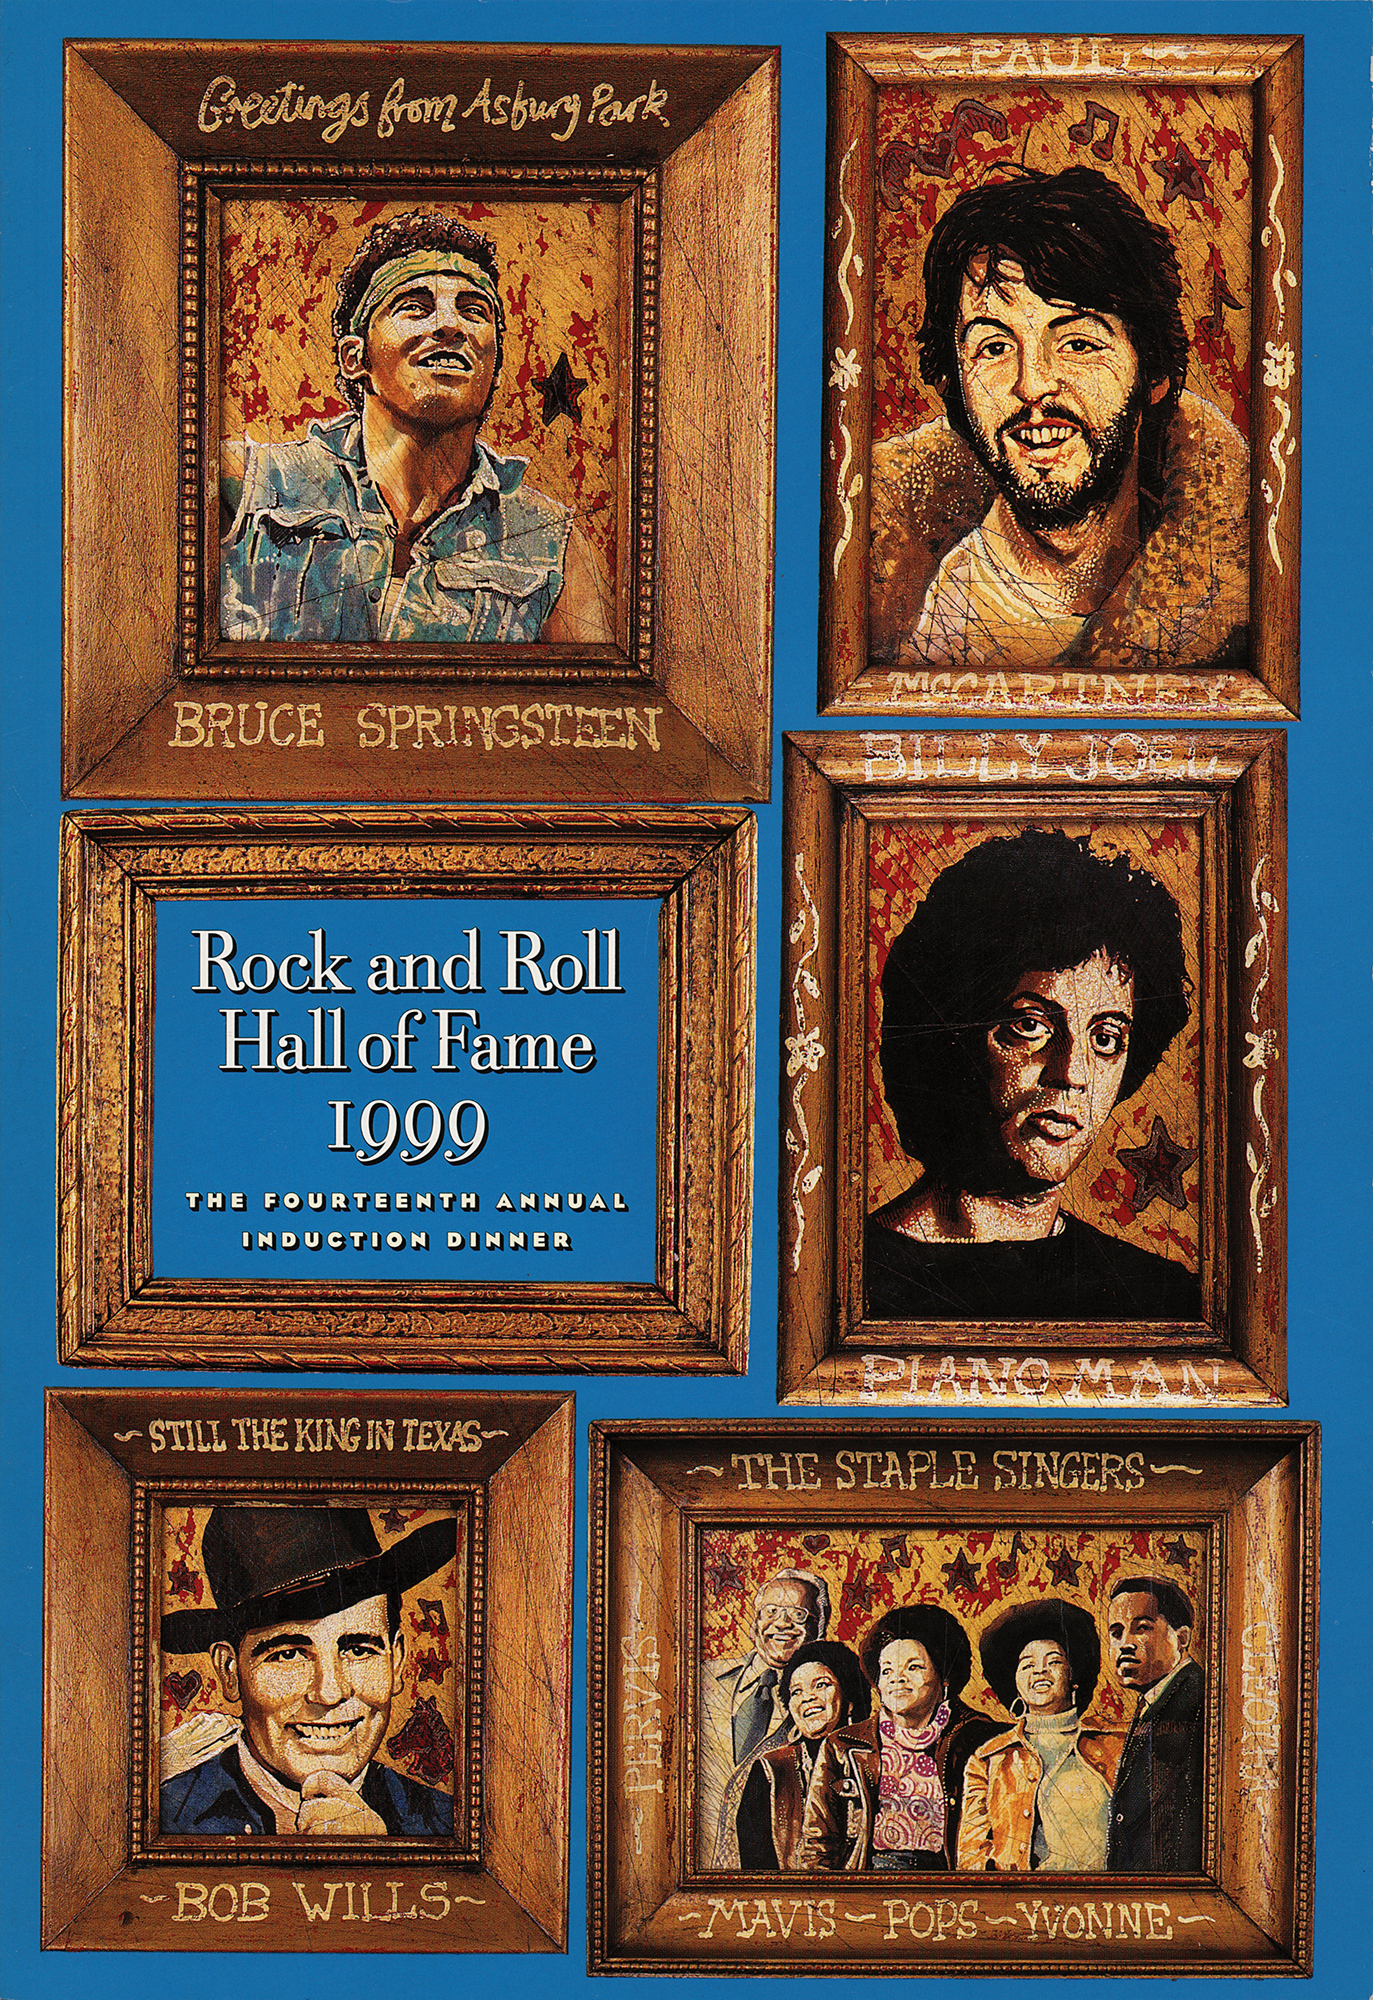 Lot #2036 Paul McCartney, Bruce Springsteen, and Others 1999 Rock and Roll Hall of Fame Program